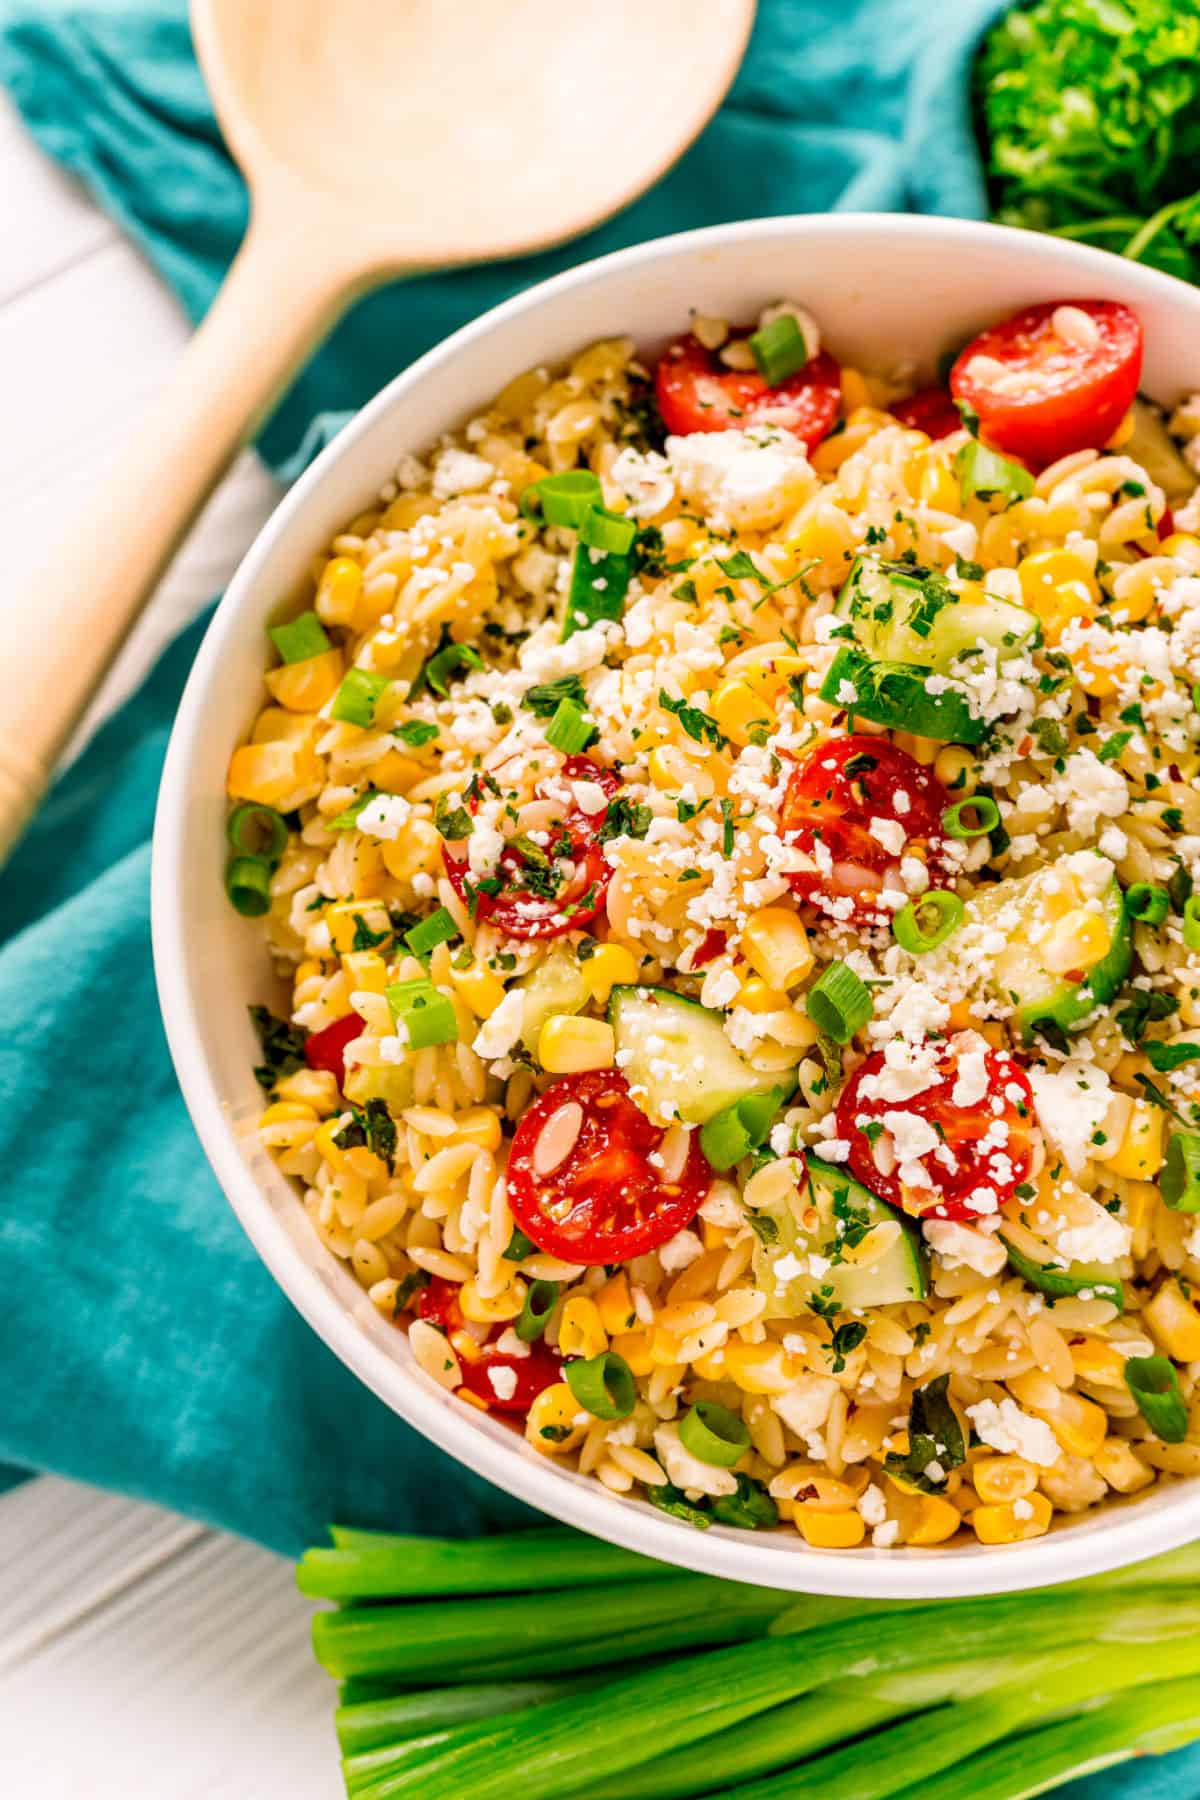 Pasta salad with orzo, corn, tomatoes, and cucumber in white bowl.